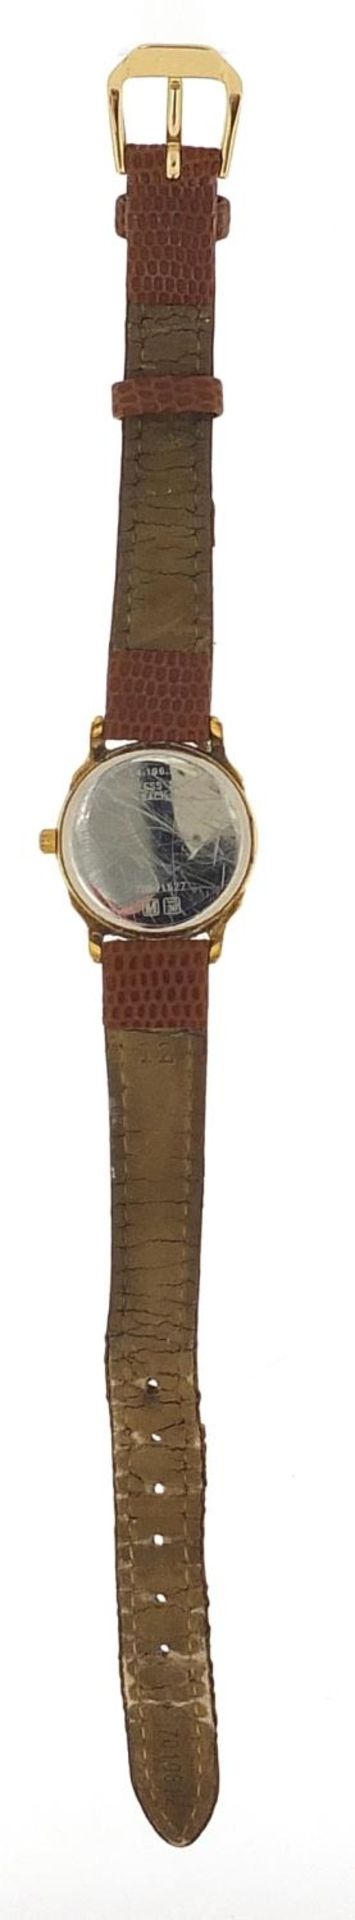 Longines, ladies vintage wristwatch with box and paperwork, with date aperture, numbered 28691527, - Image 4 of 6